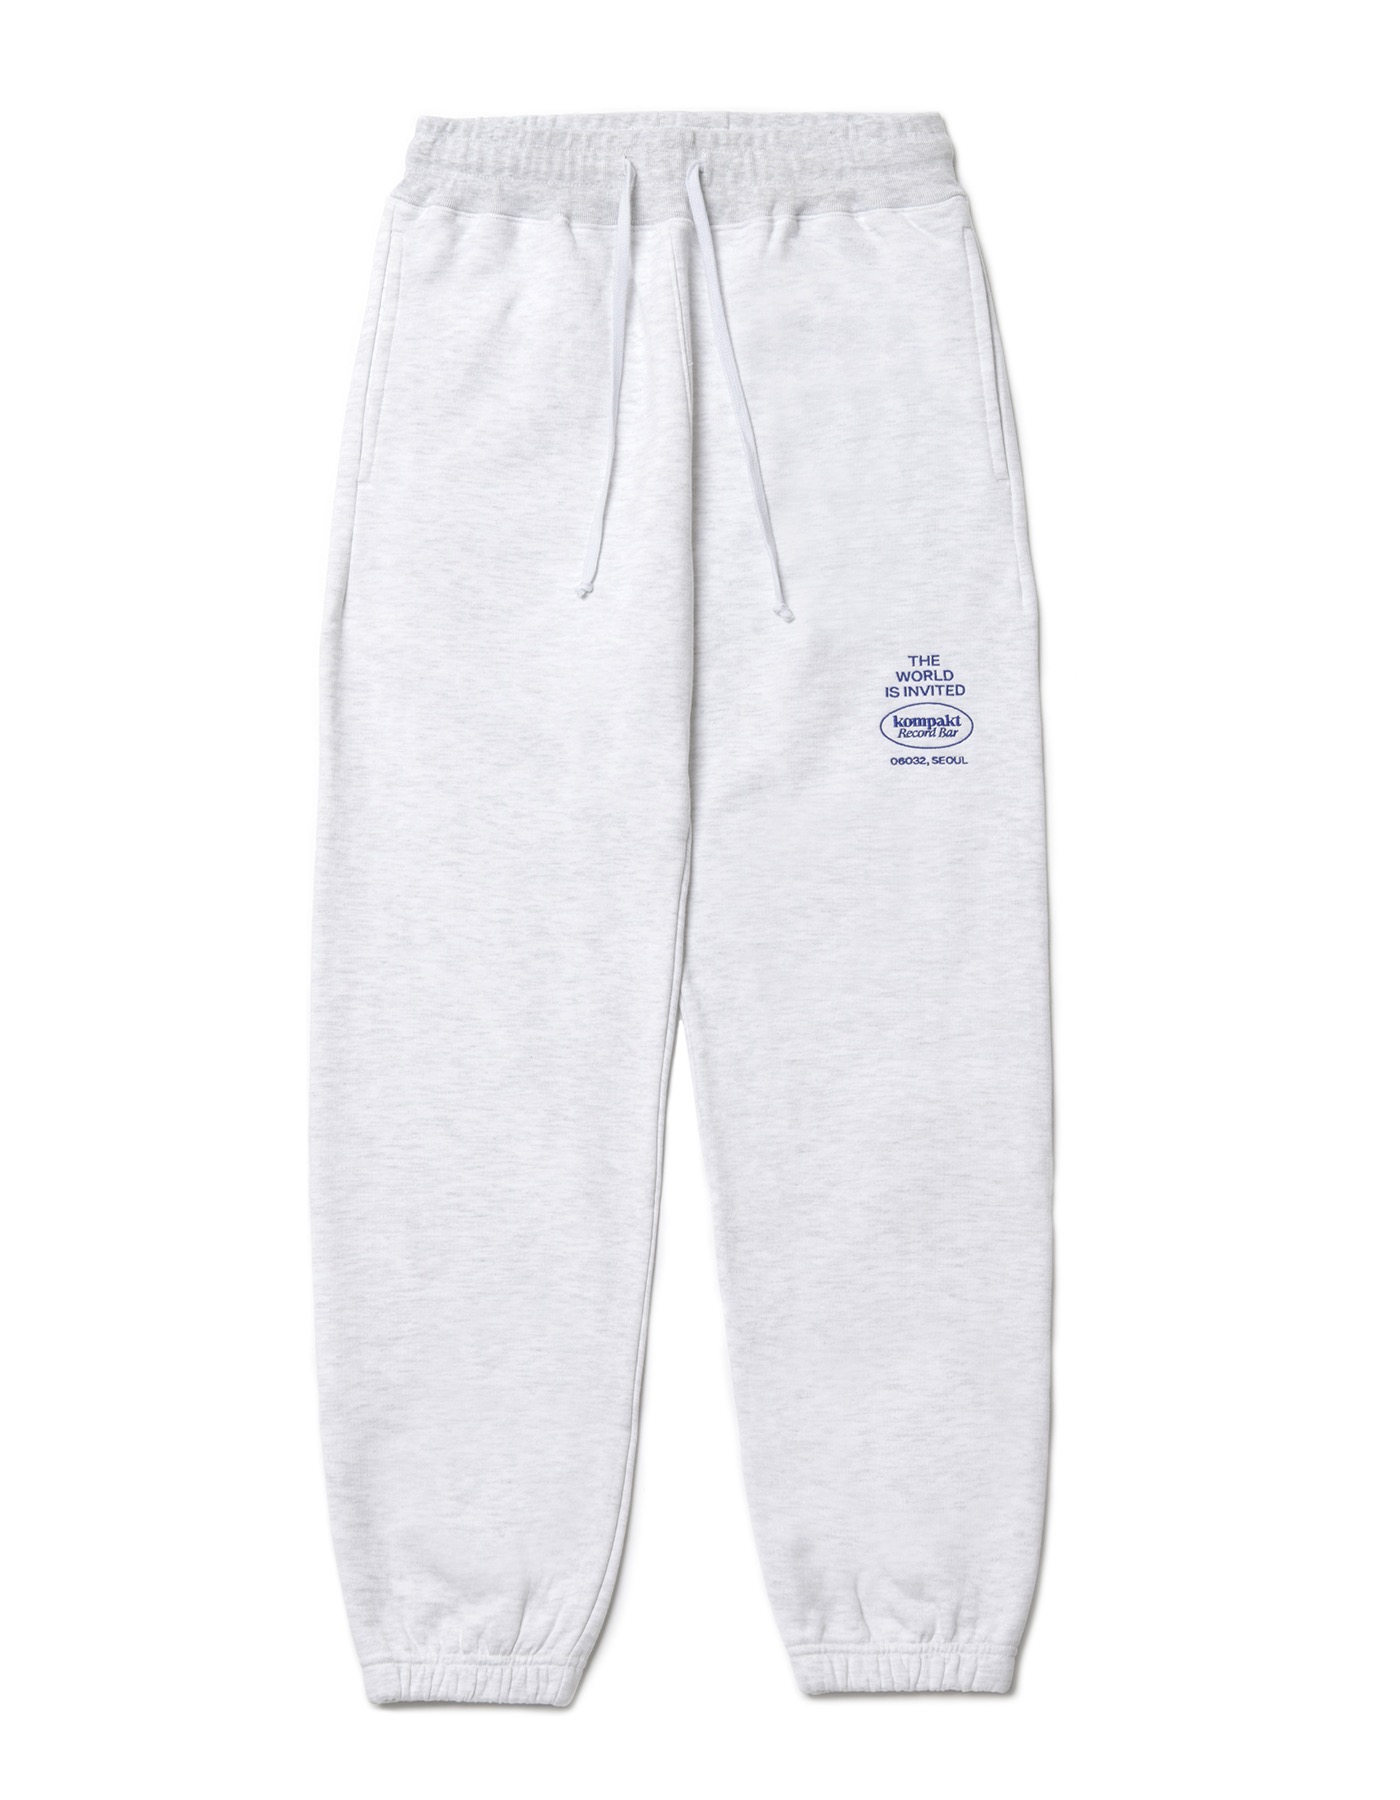 The World is Invited Embroidery Sweatpants - White Melange